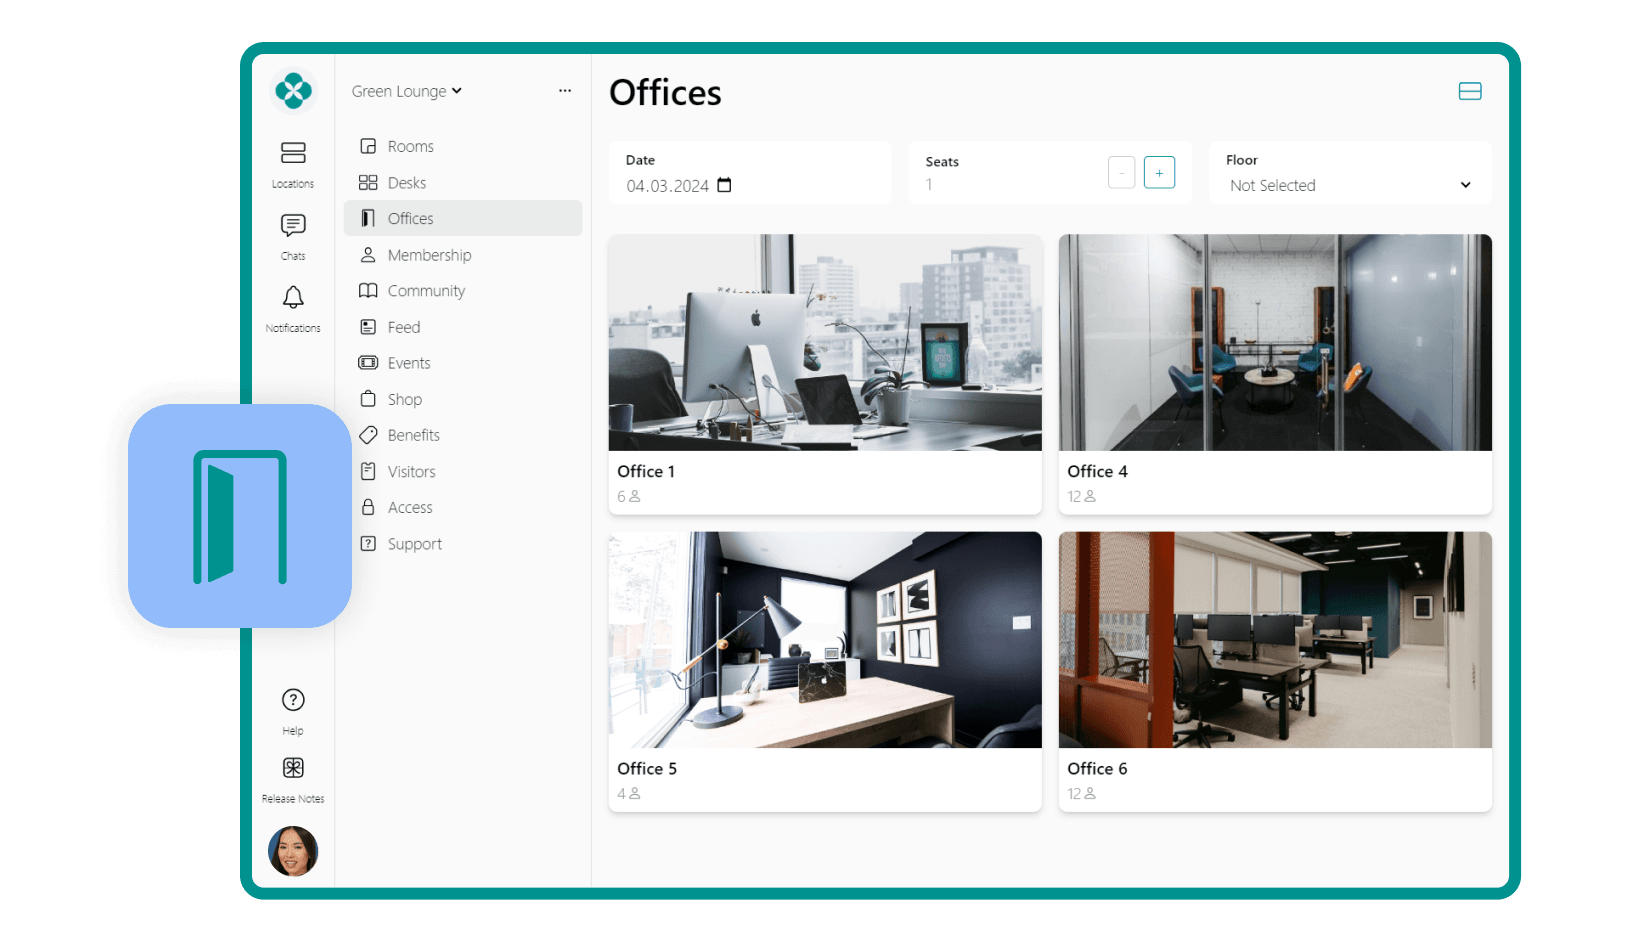 Offices Page